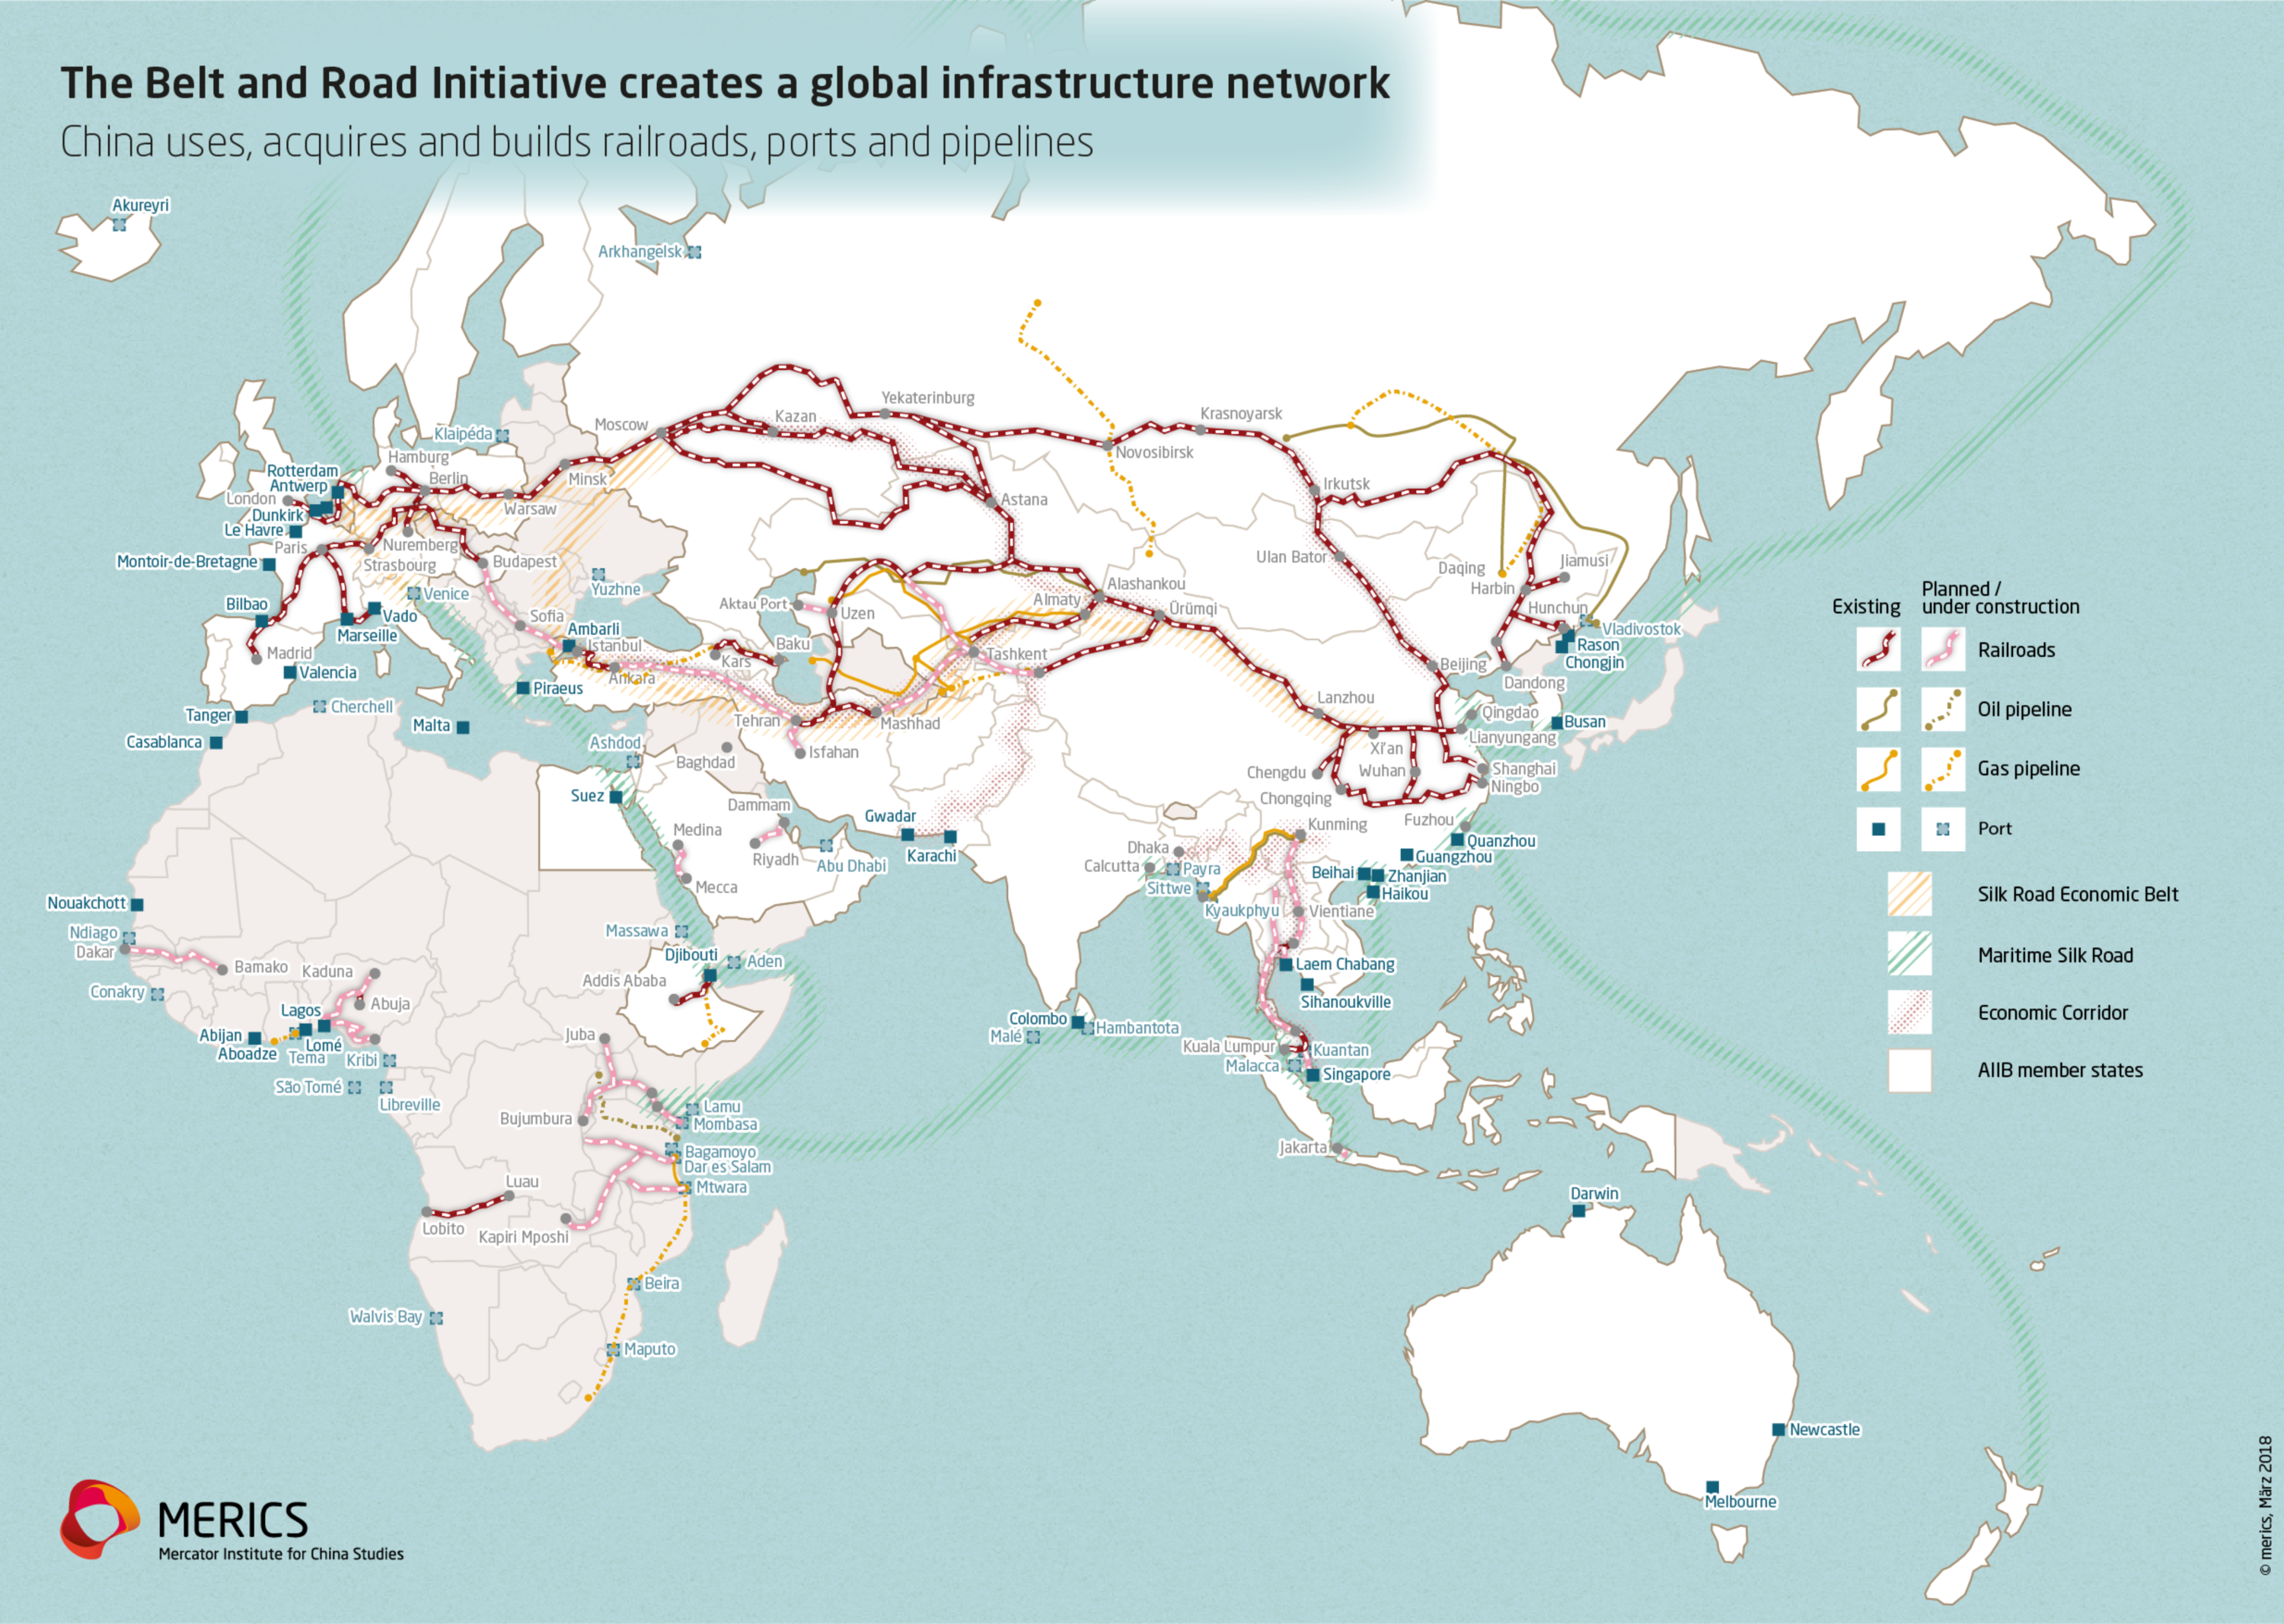 A detailed map of the Belt & Road Initiative showing railroads, oil and gas pipelines, and ports.